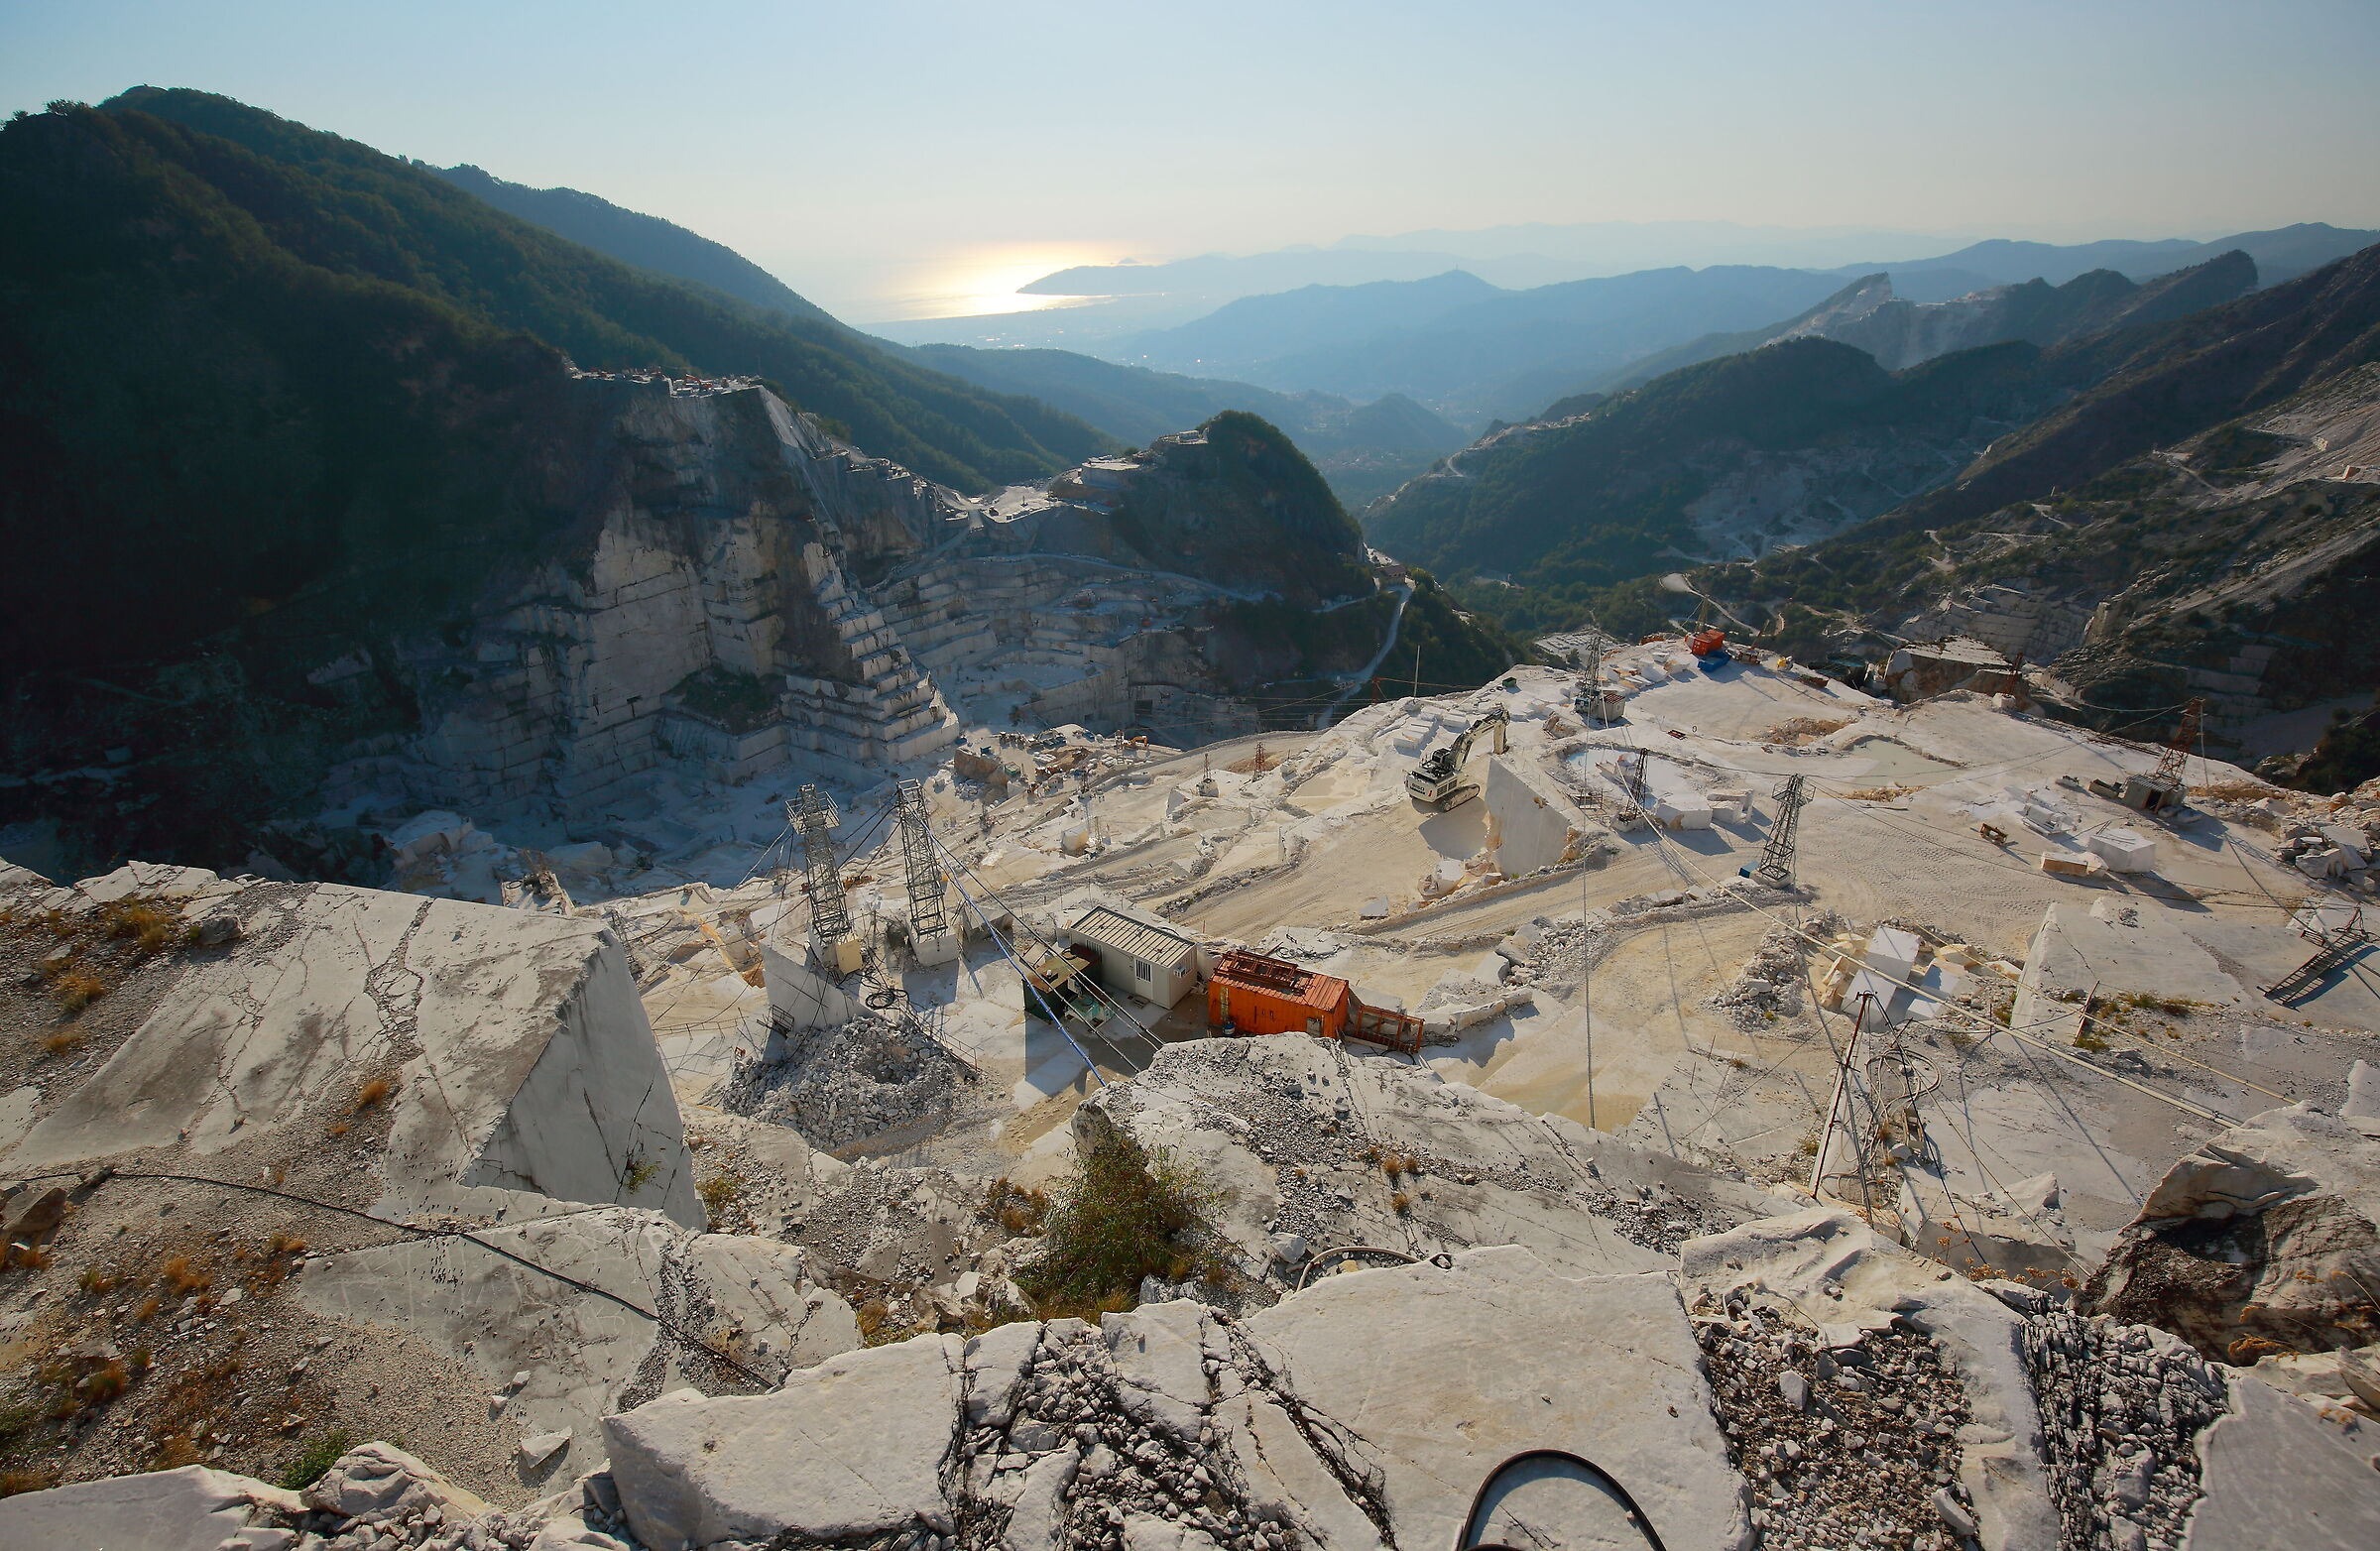 The landscape of the Gioia quarry ...